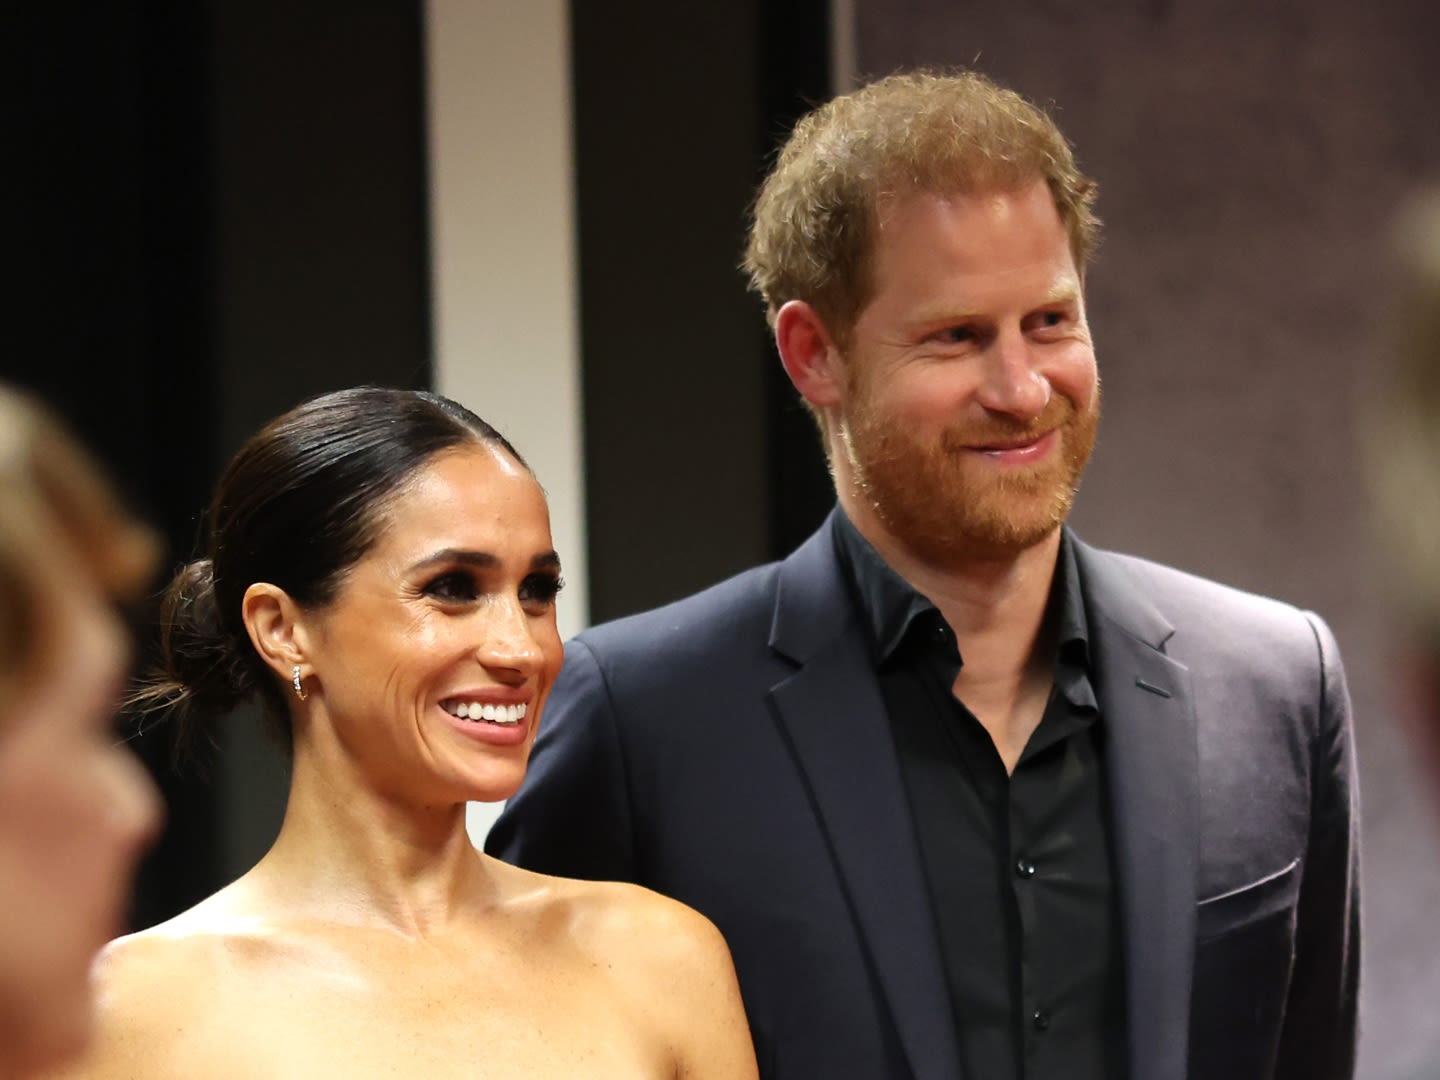 Prince Harry & Meghan Markle's Fans Are Being Accused of 'Driving' the Kate Middleton Rumors